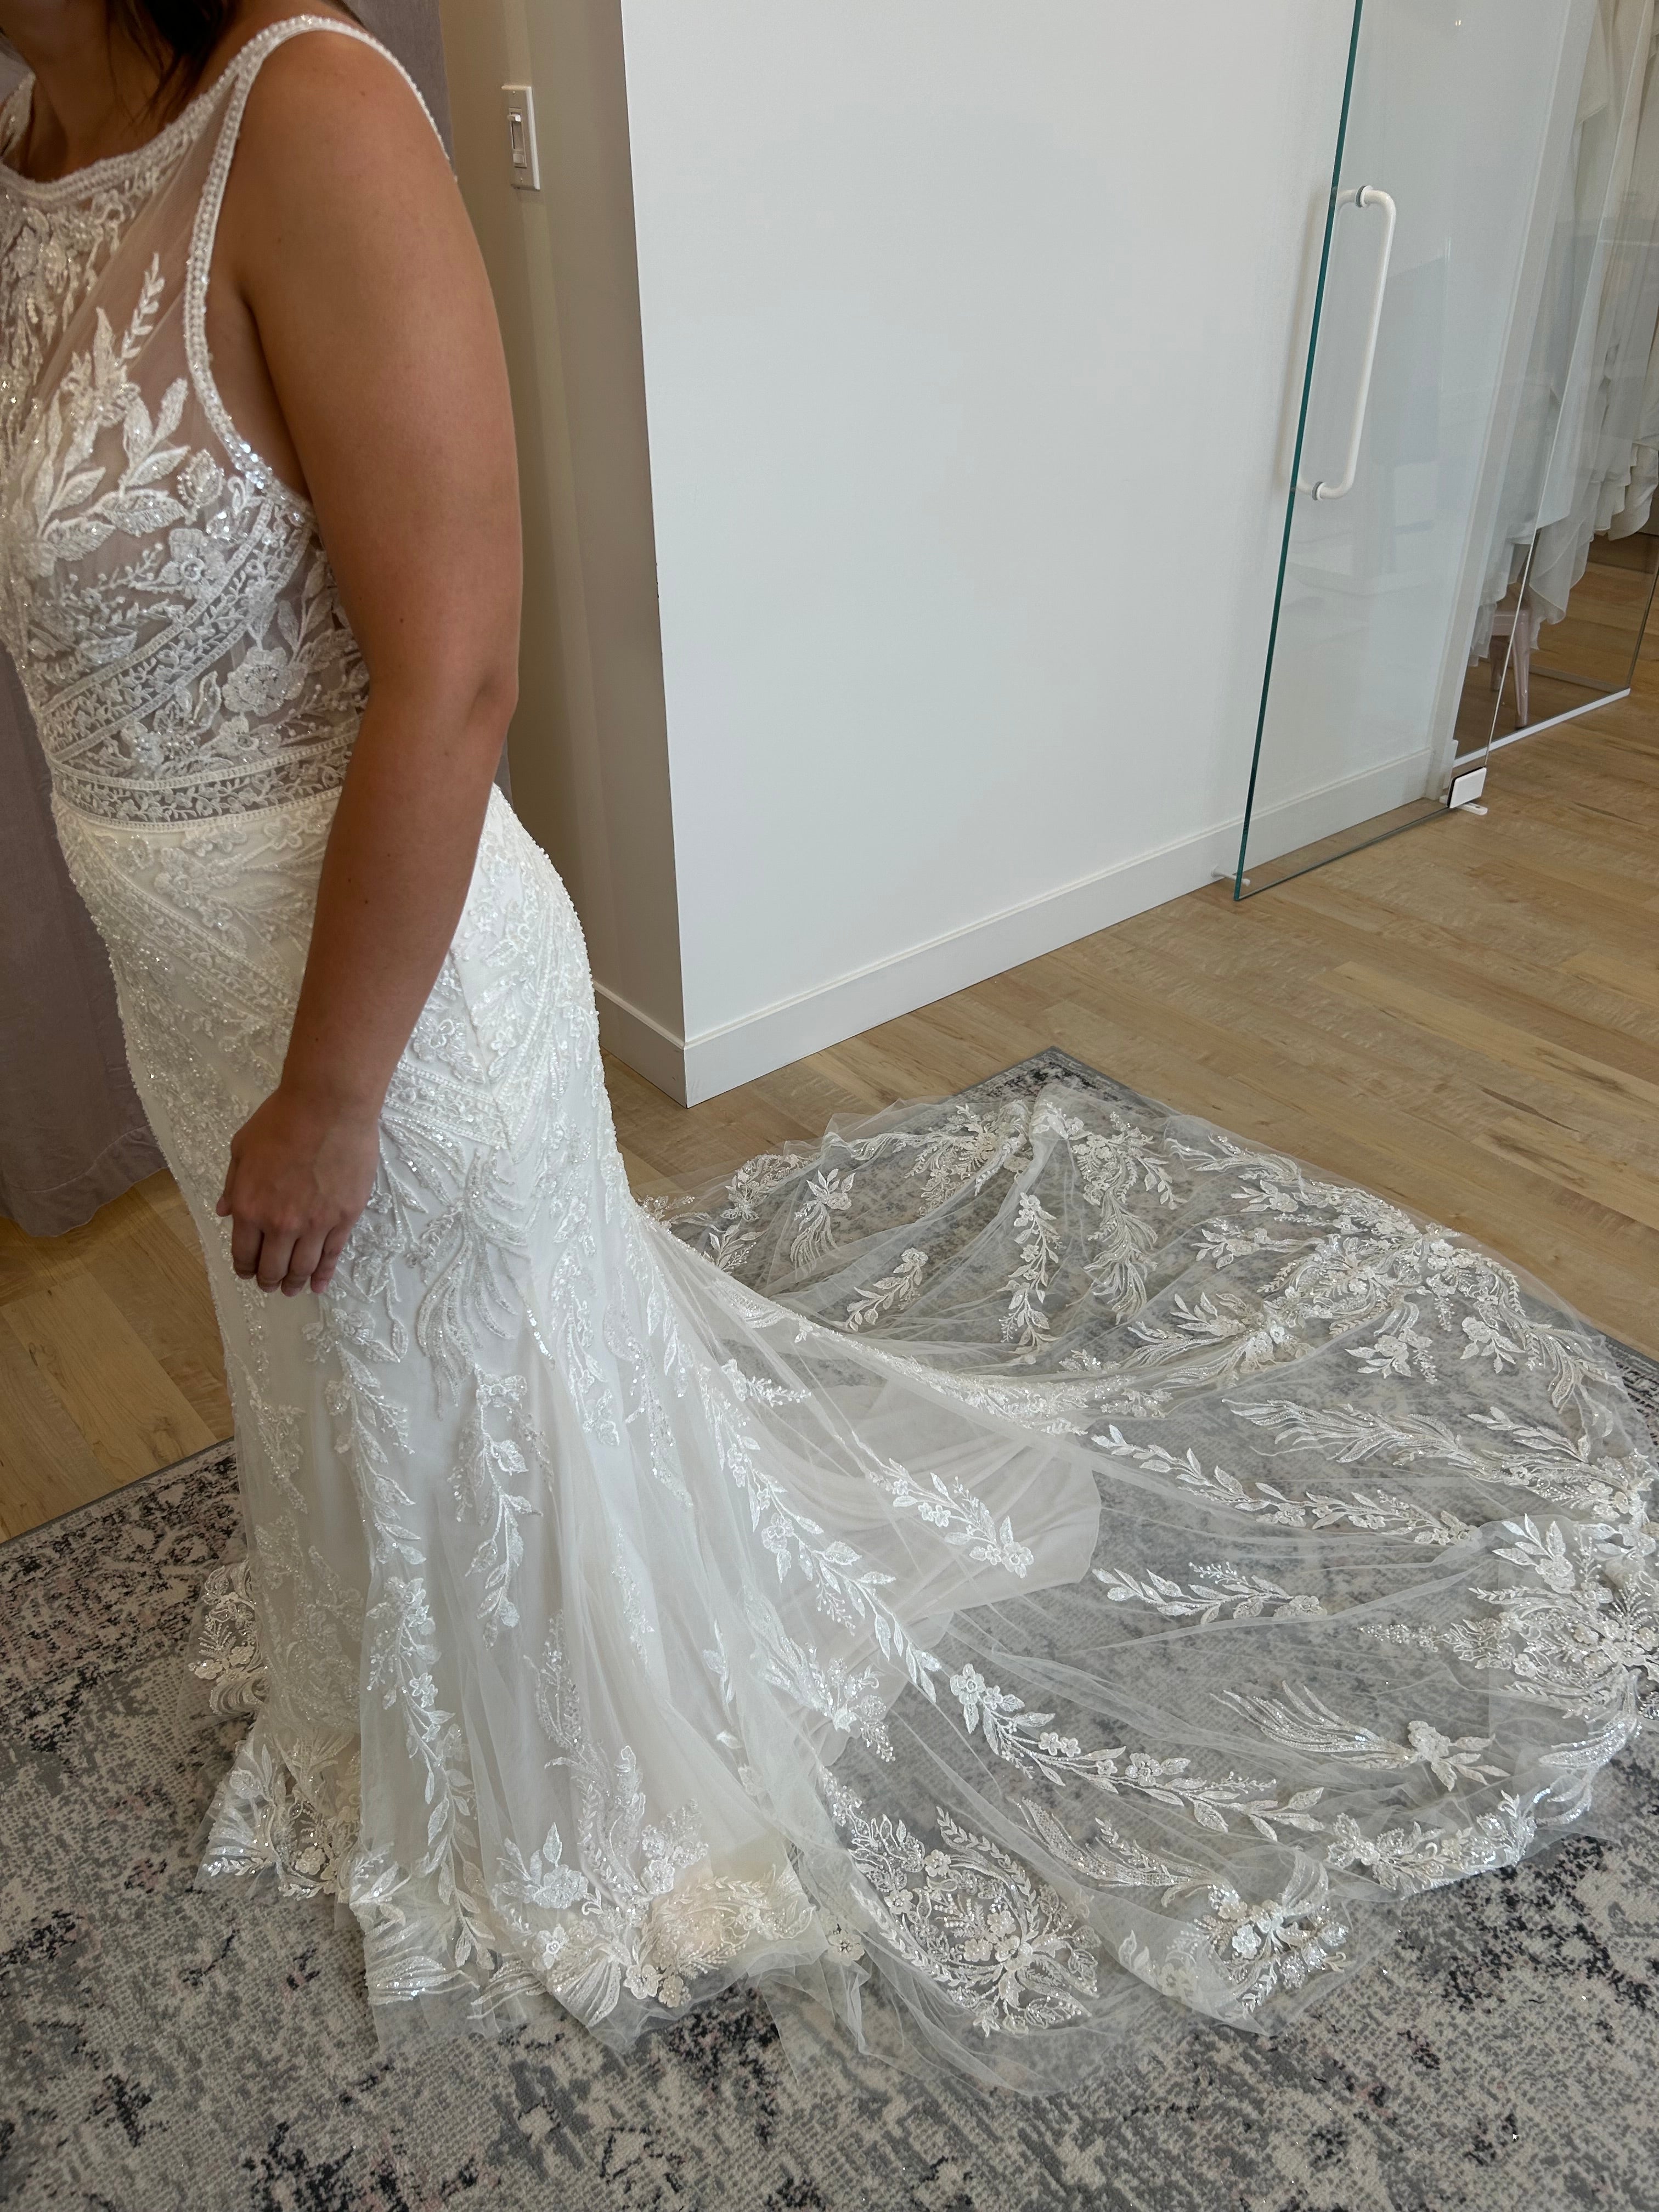 Kyle - high end boho glam inspired fitted wedding dress in luxurious lace with open back and tulle overskirt